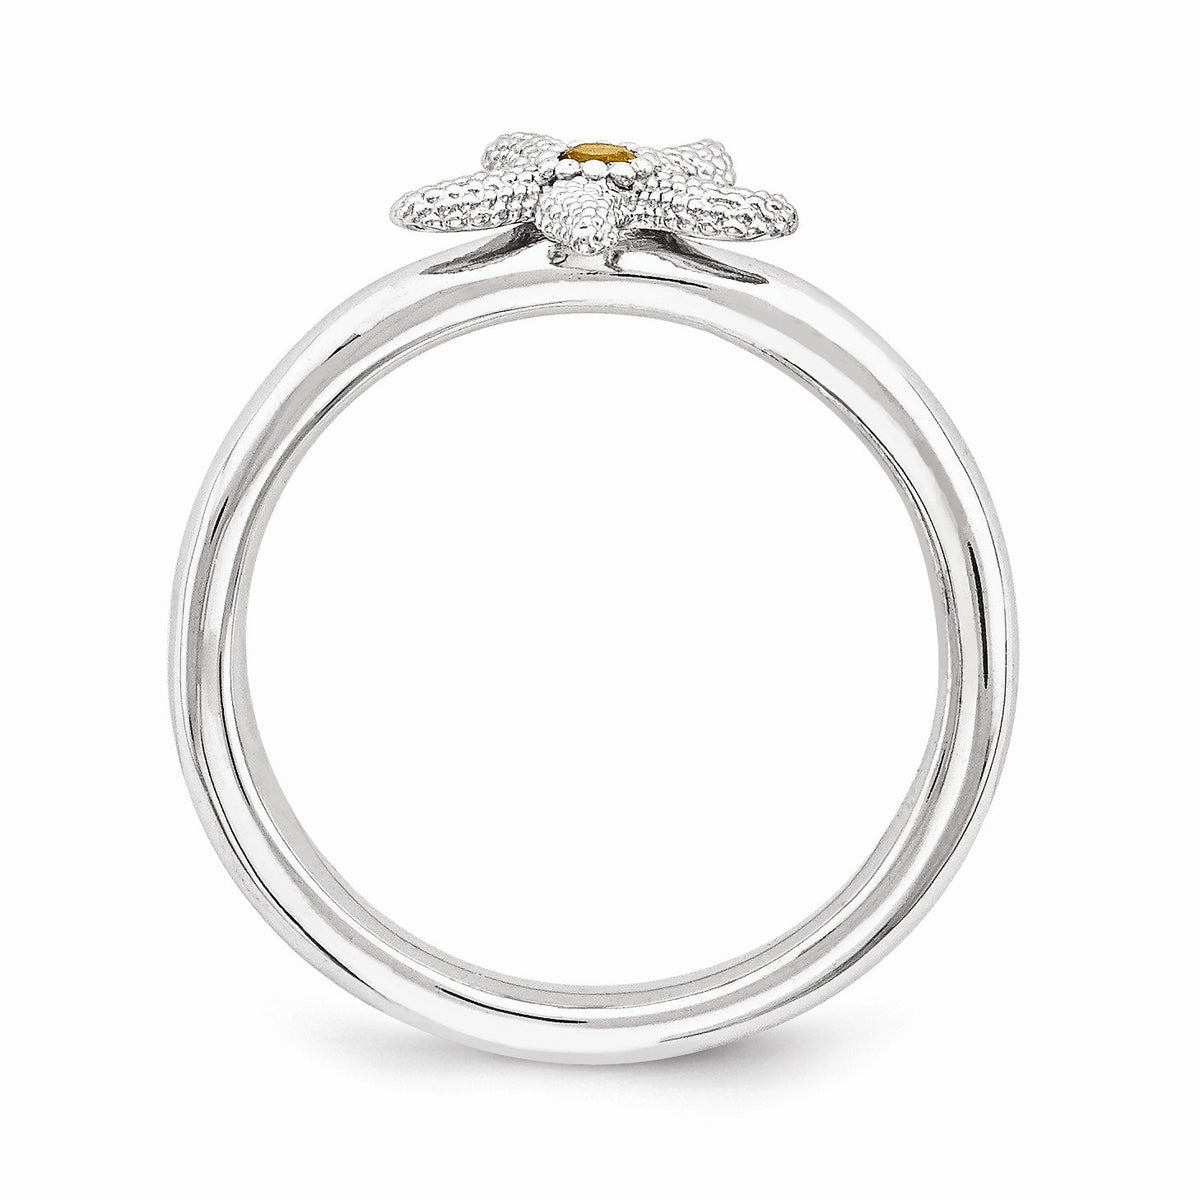 Alternate view of the Sterling Silver Stackable Expressions Citrine 10mm Starfish Ring by The Black Bow Jewelry Co.